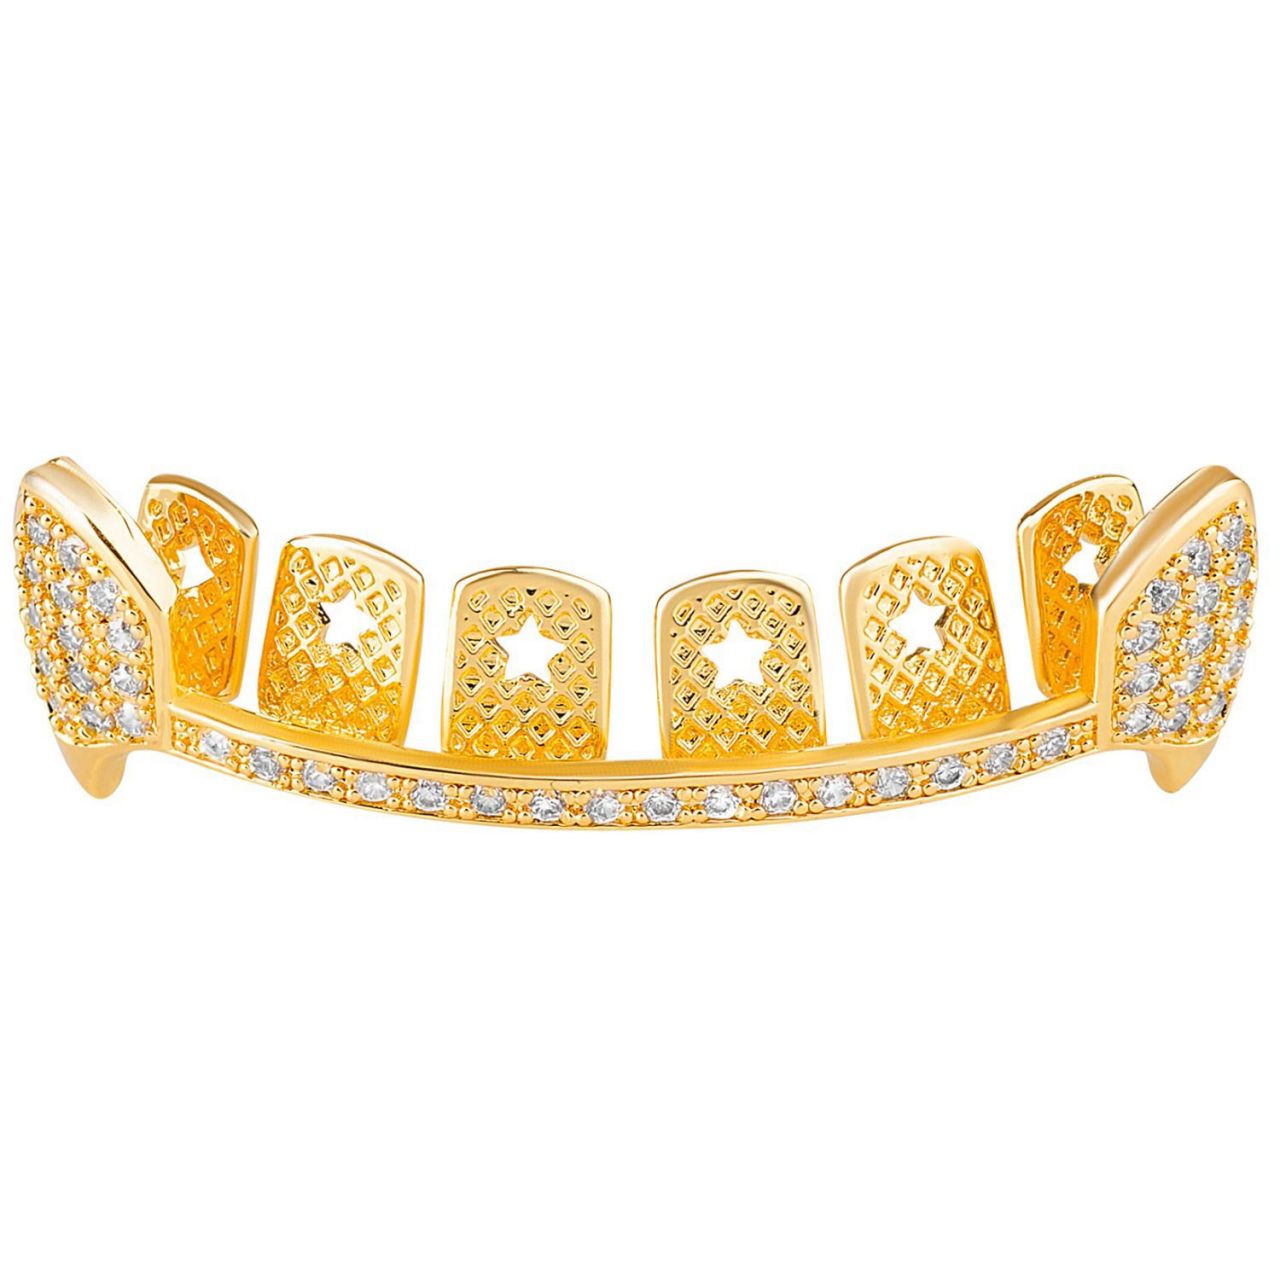 One size fits all Grillz – VAMPIRE Bling Zirkonia Bar gold